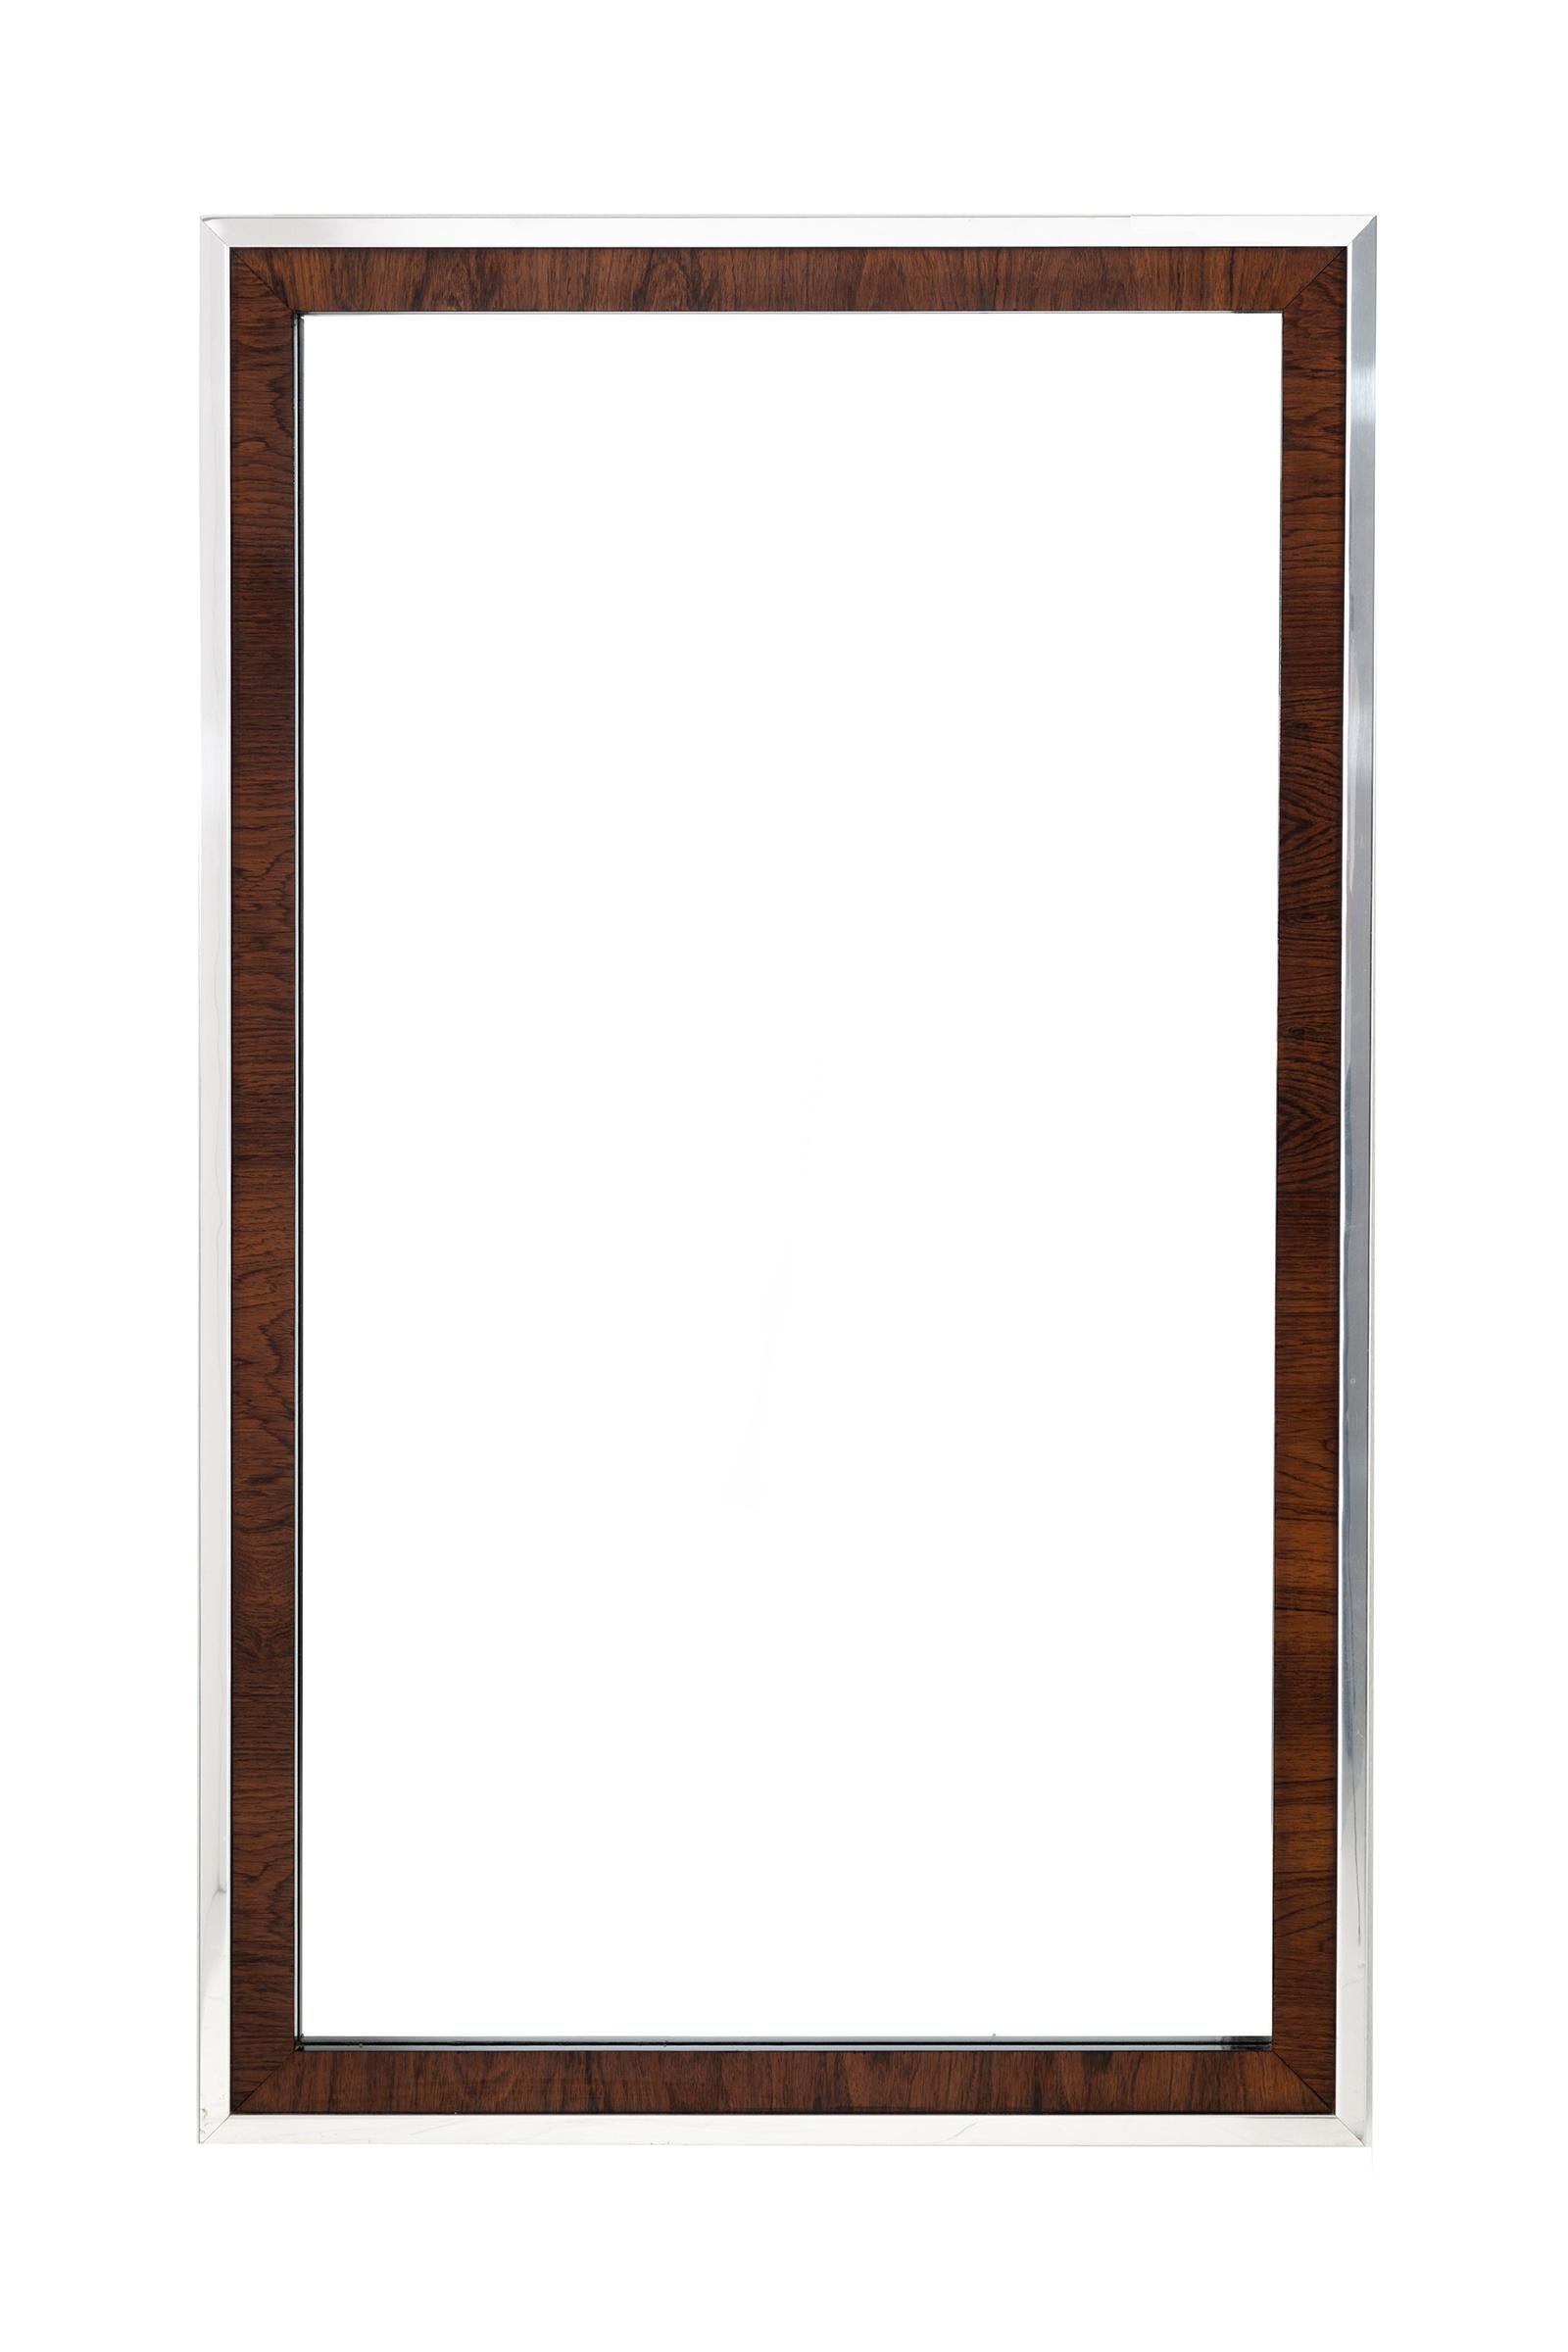 Florence Knoll style rosewood and chrome mirror, can be displayed vertically or horizontally.